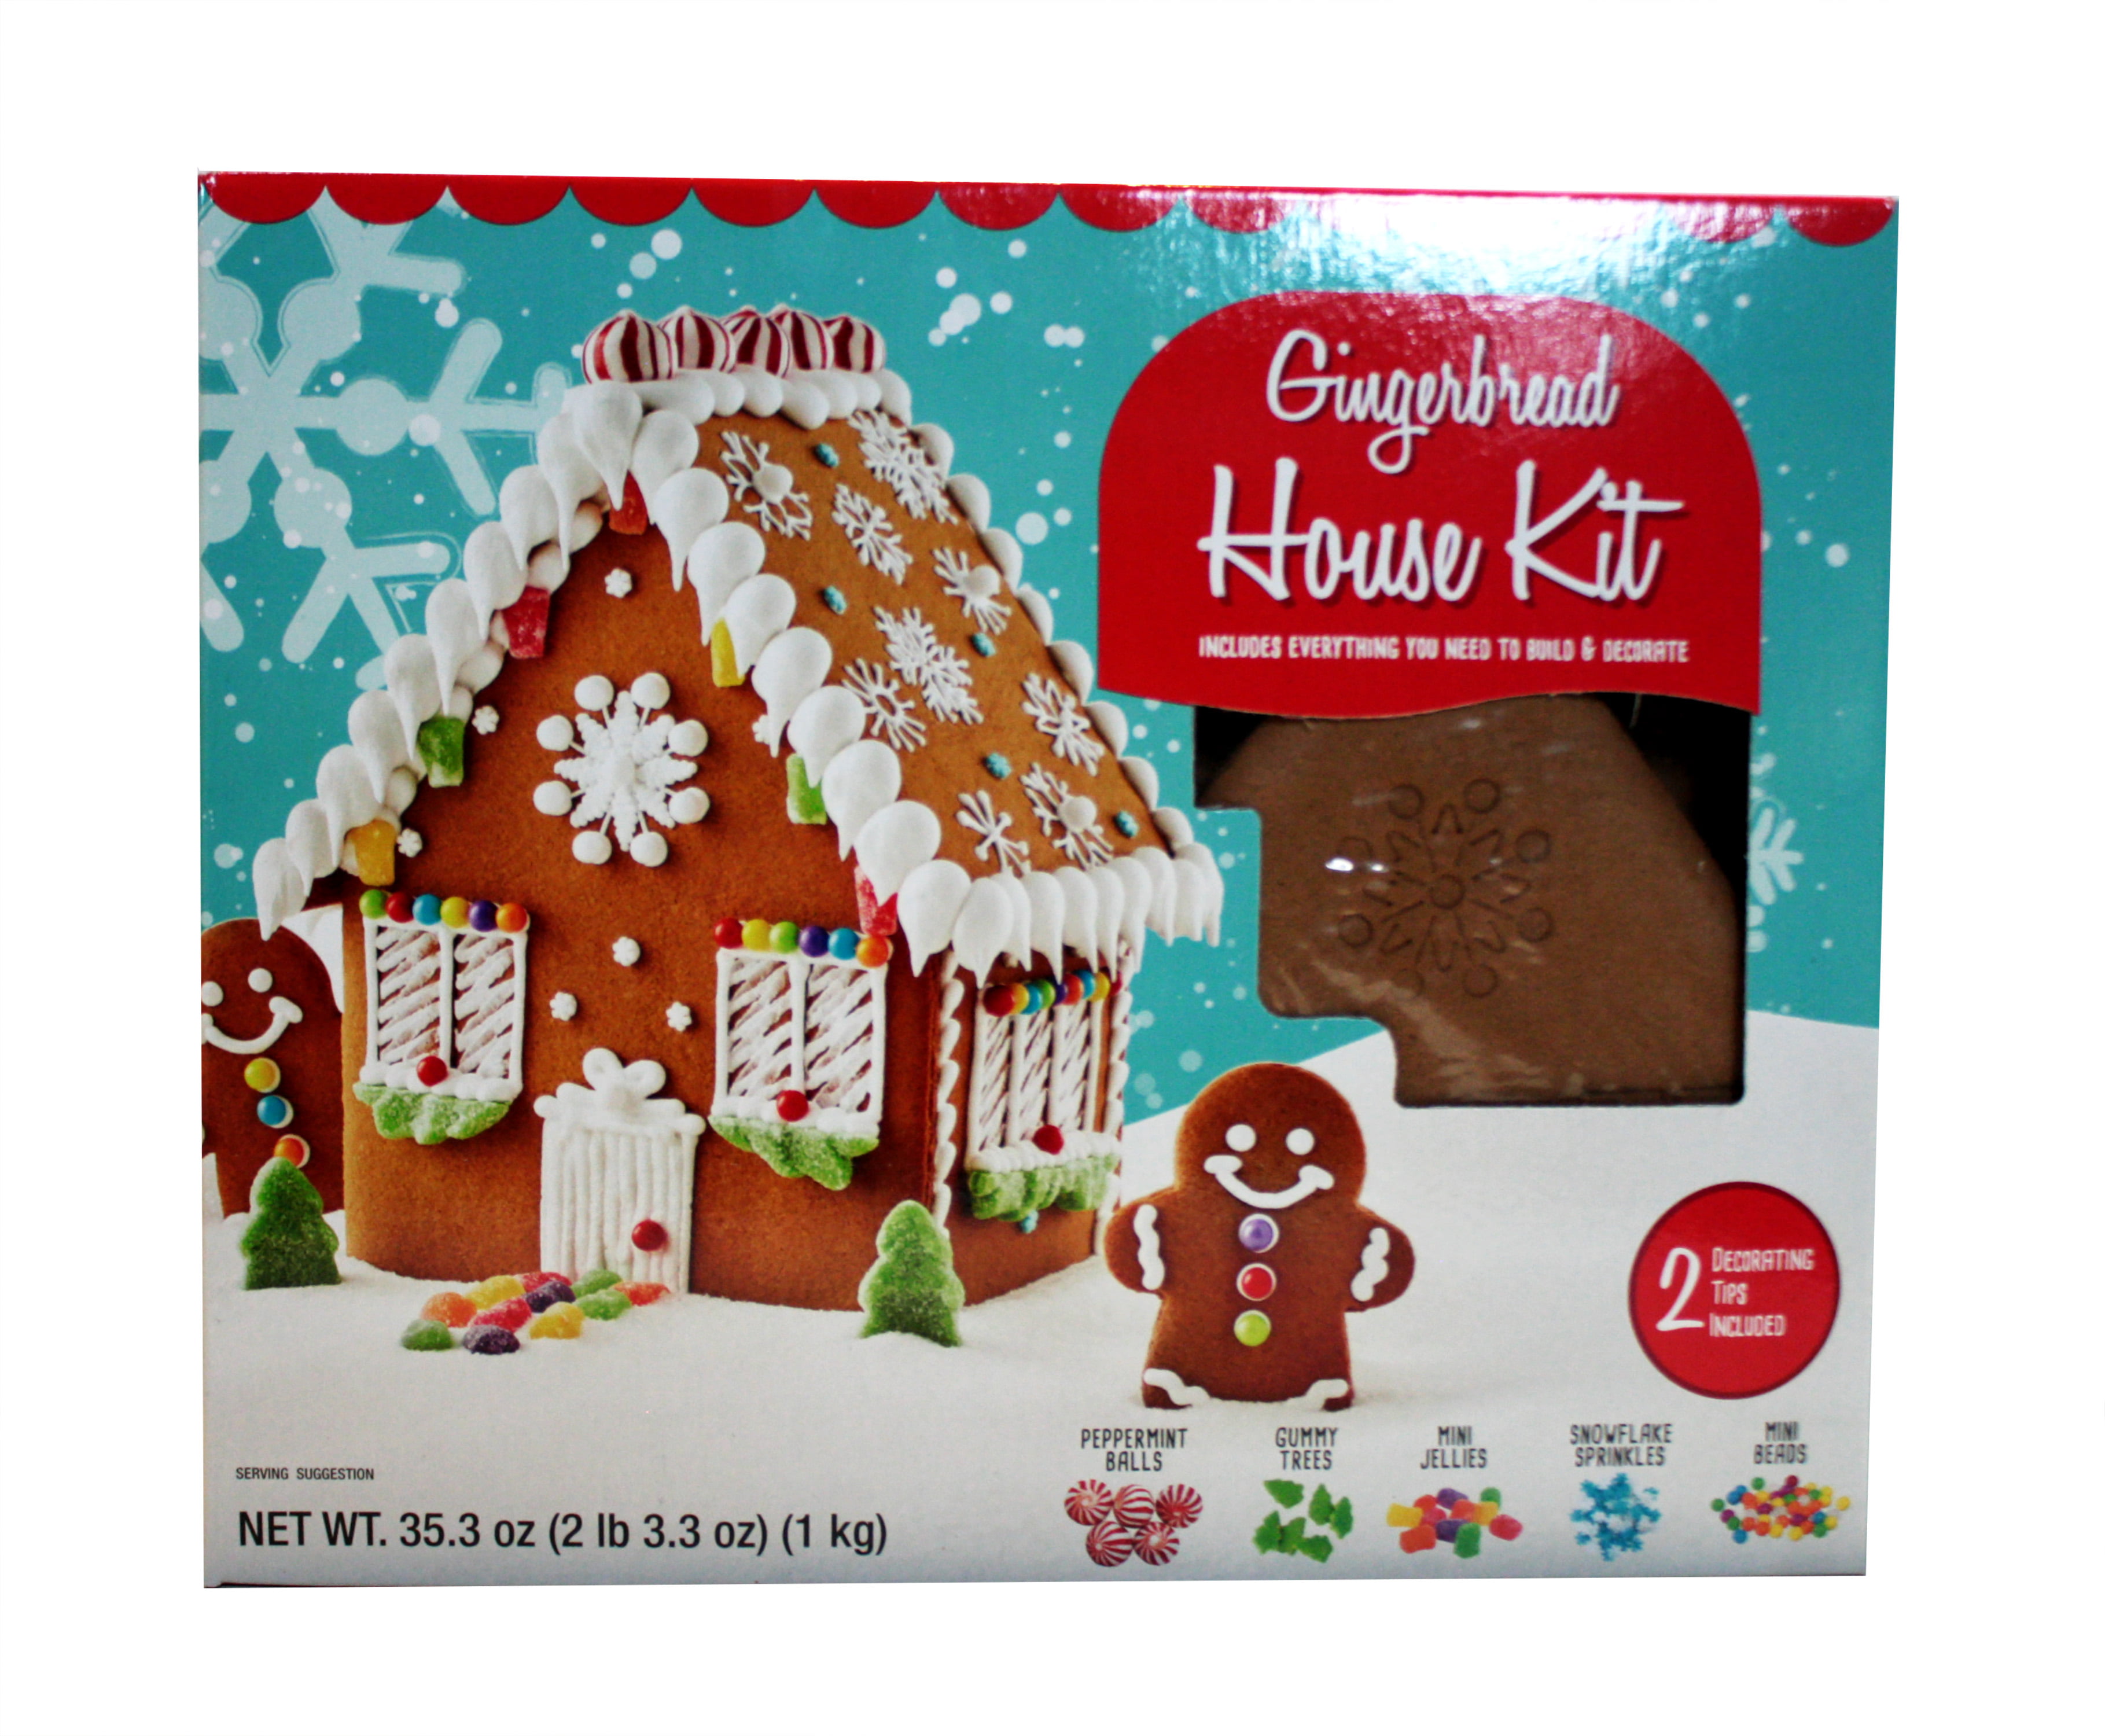 Large gingerbread house kit